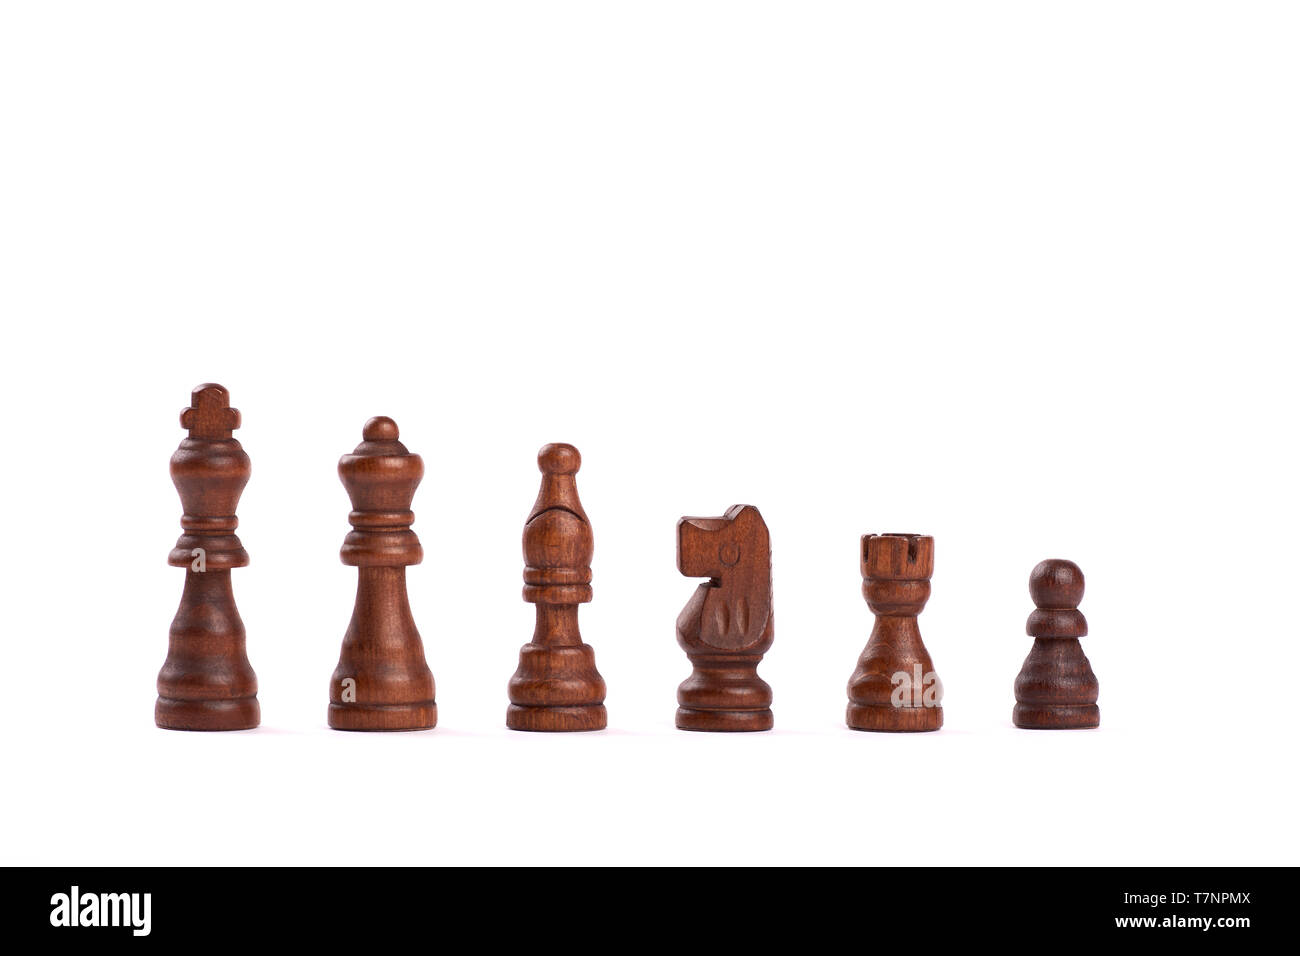 Set of black wooden chess figures standing in a row isolated on white background Stock Photo